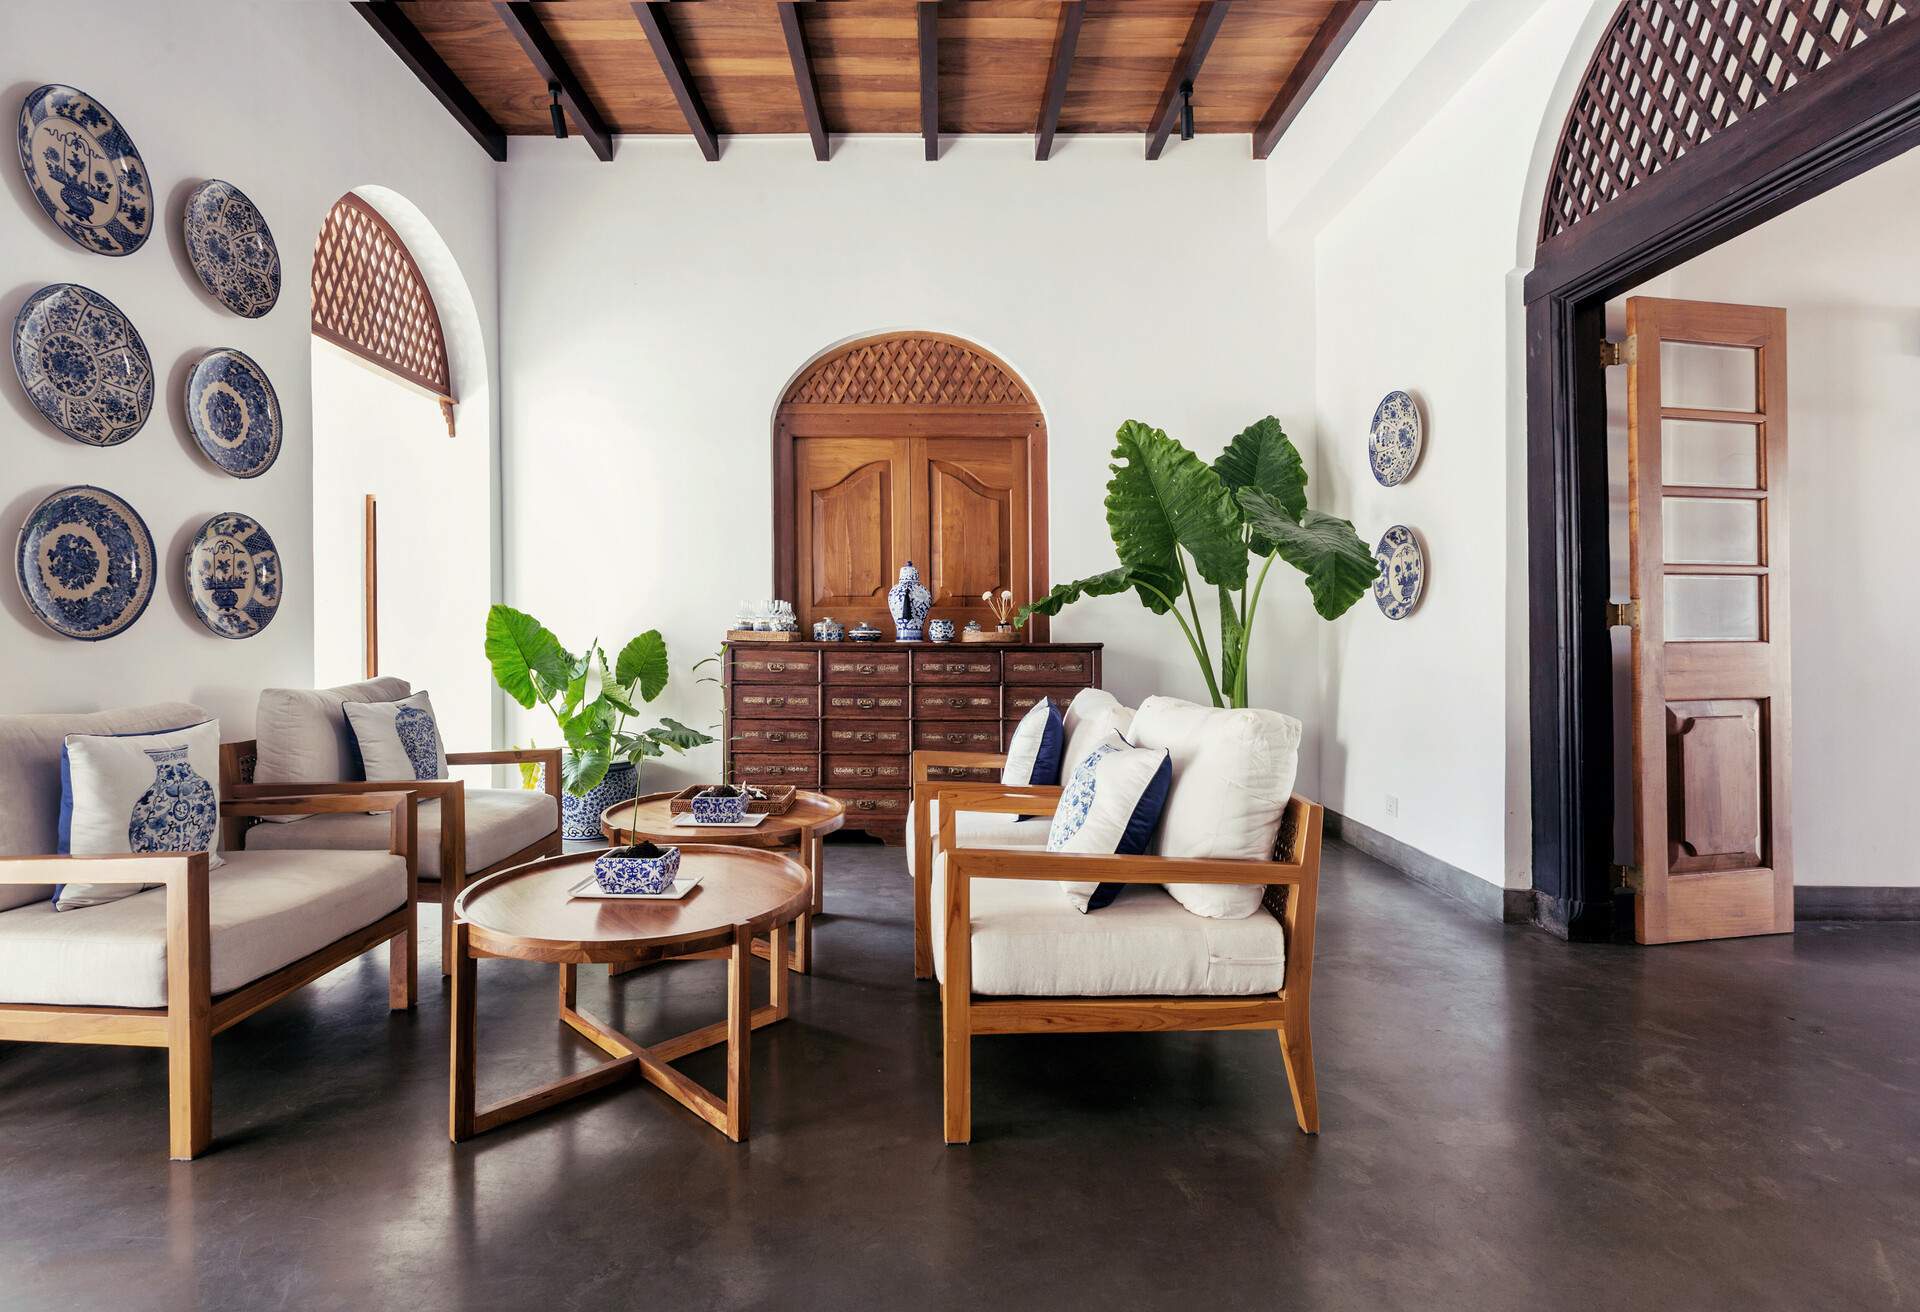 A light and bright living area with seats, wooden coffee tables, potted plants, and decorative wall plates.